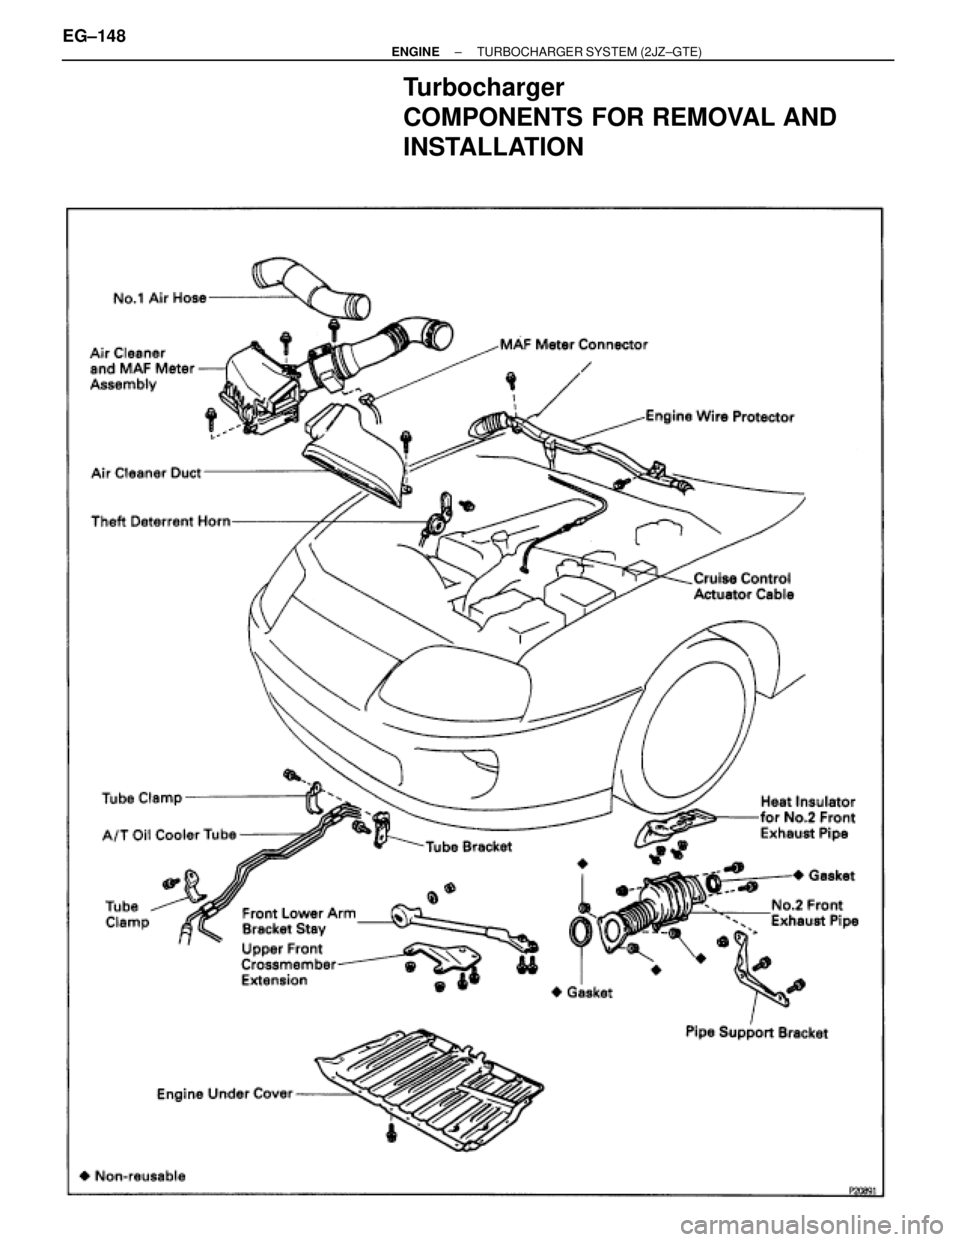 TOYOTA SUPRA 1986  Service Repair Manual Turbocharger
COMPONENTS FOR REMOVAL AND
INSTALLATION
EG±148± ENGINETURBOCHARGER SYSTEM (2JZ±GTE) 